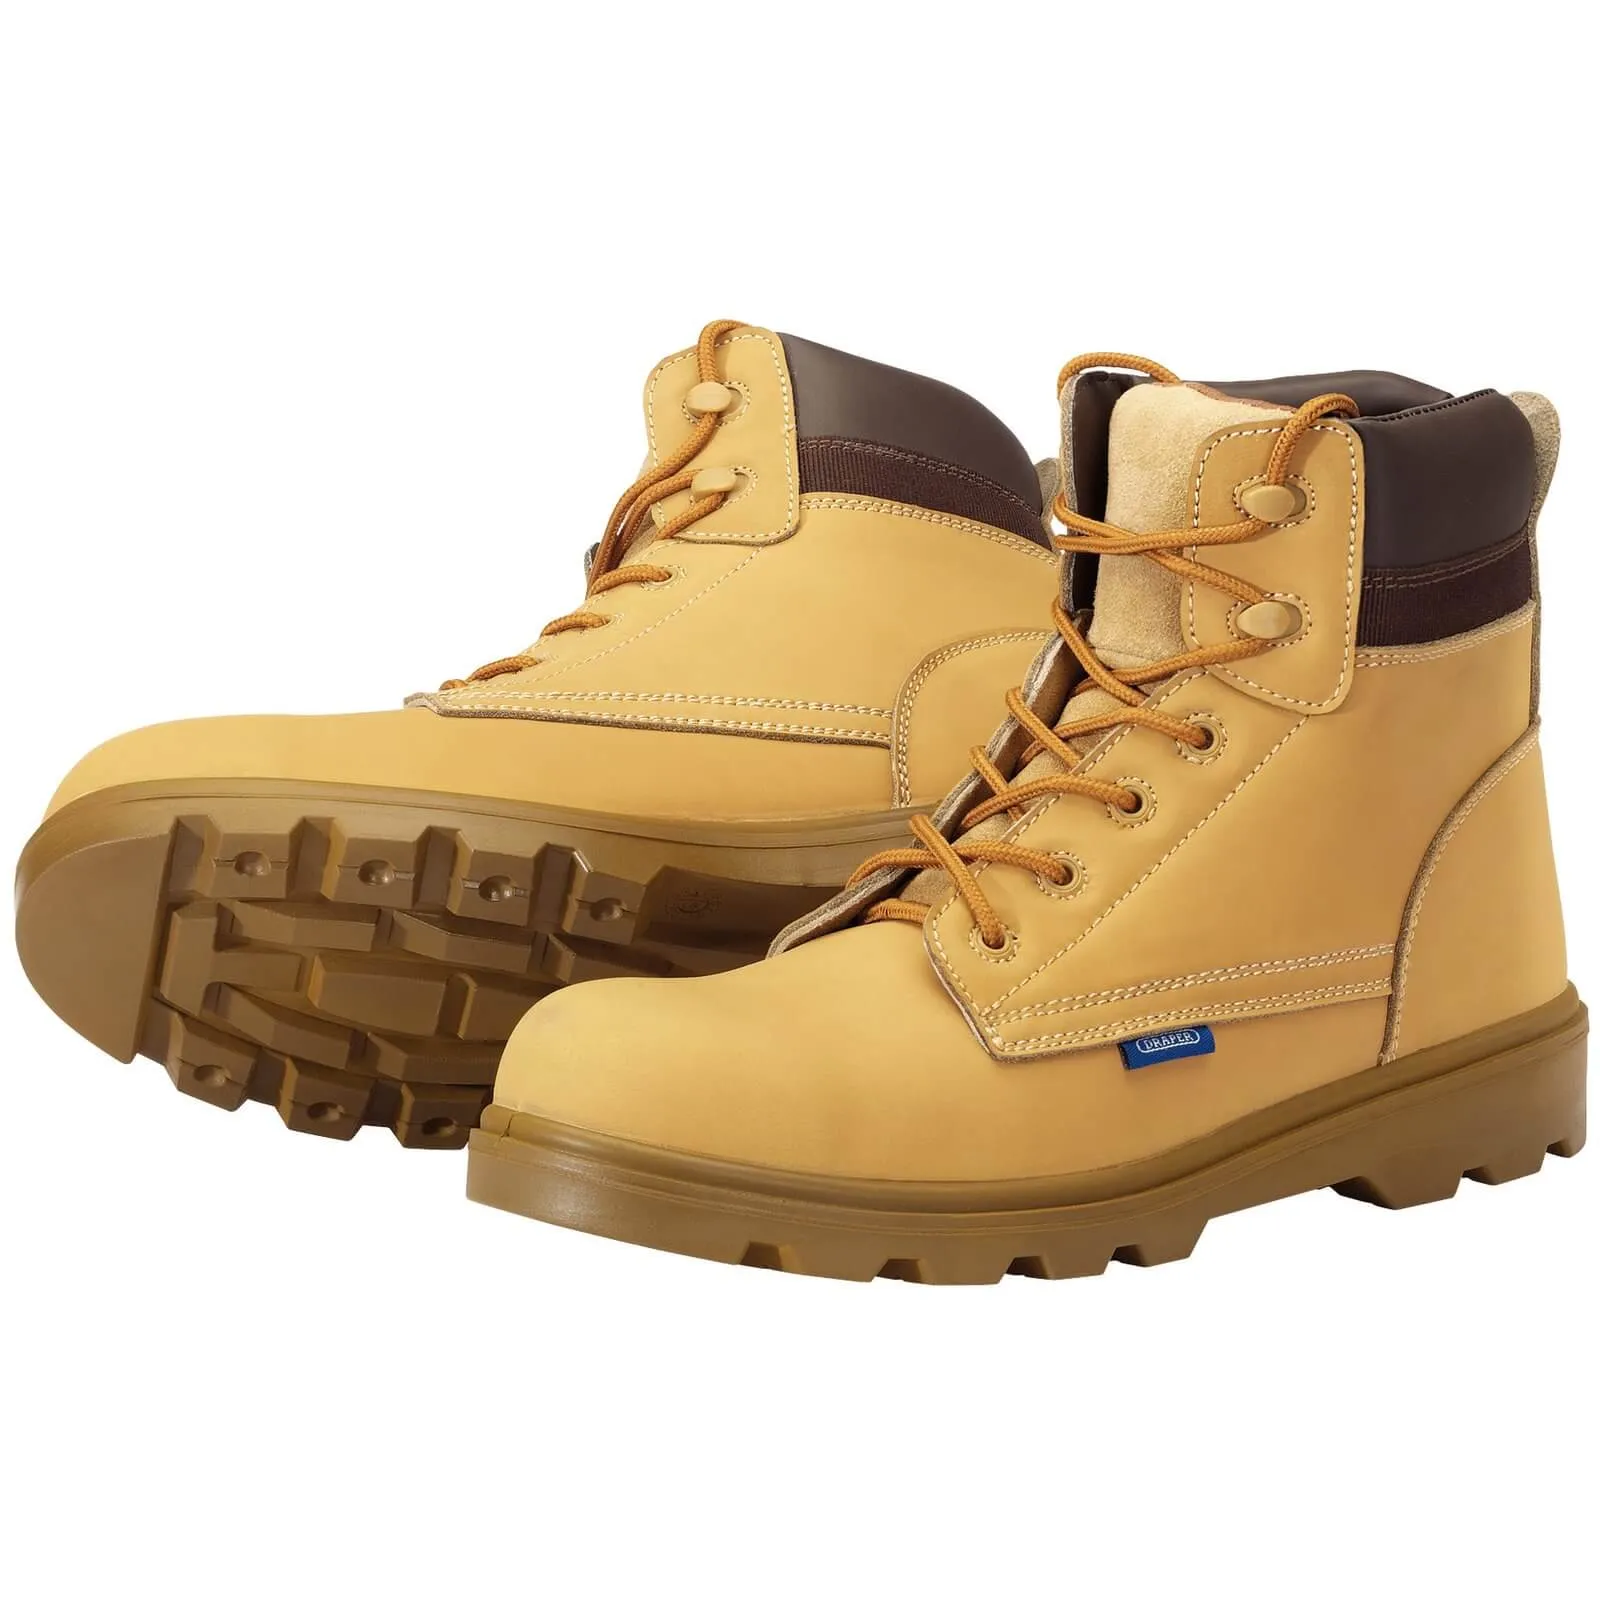 Draper Mens Nubuck Style Safety Boots - Tan, Size 9